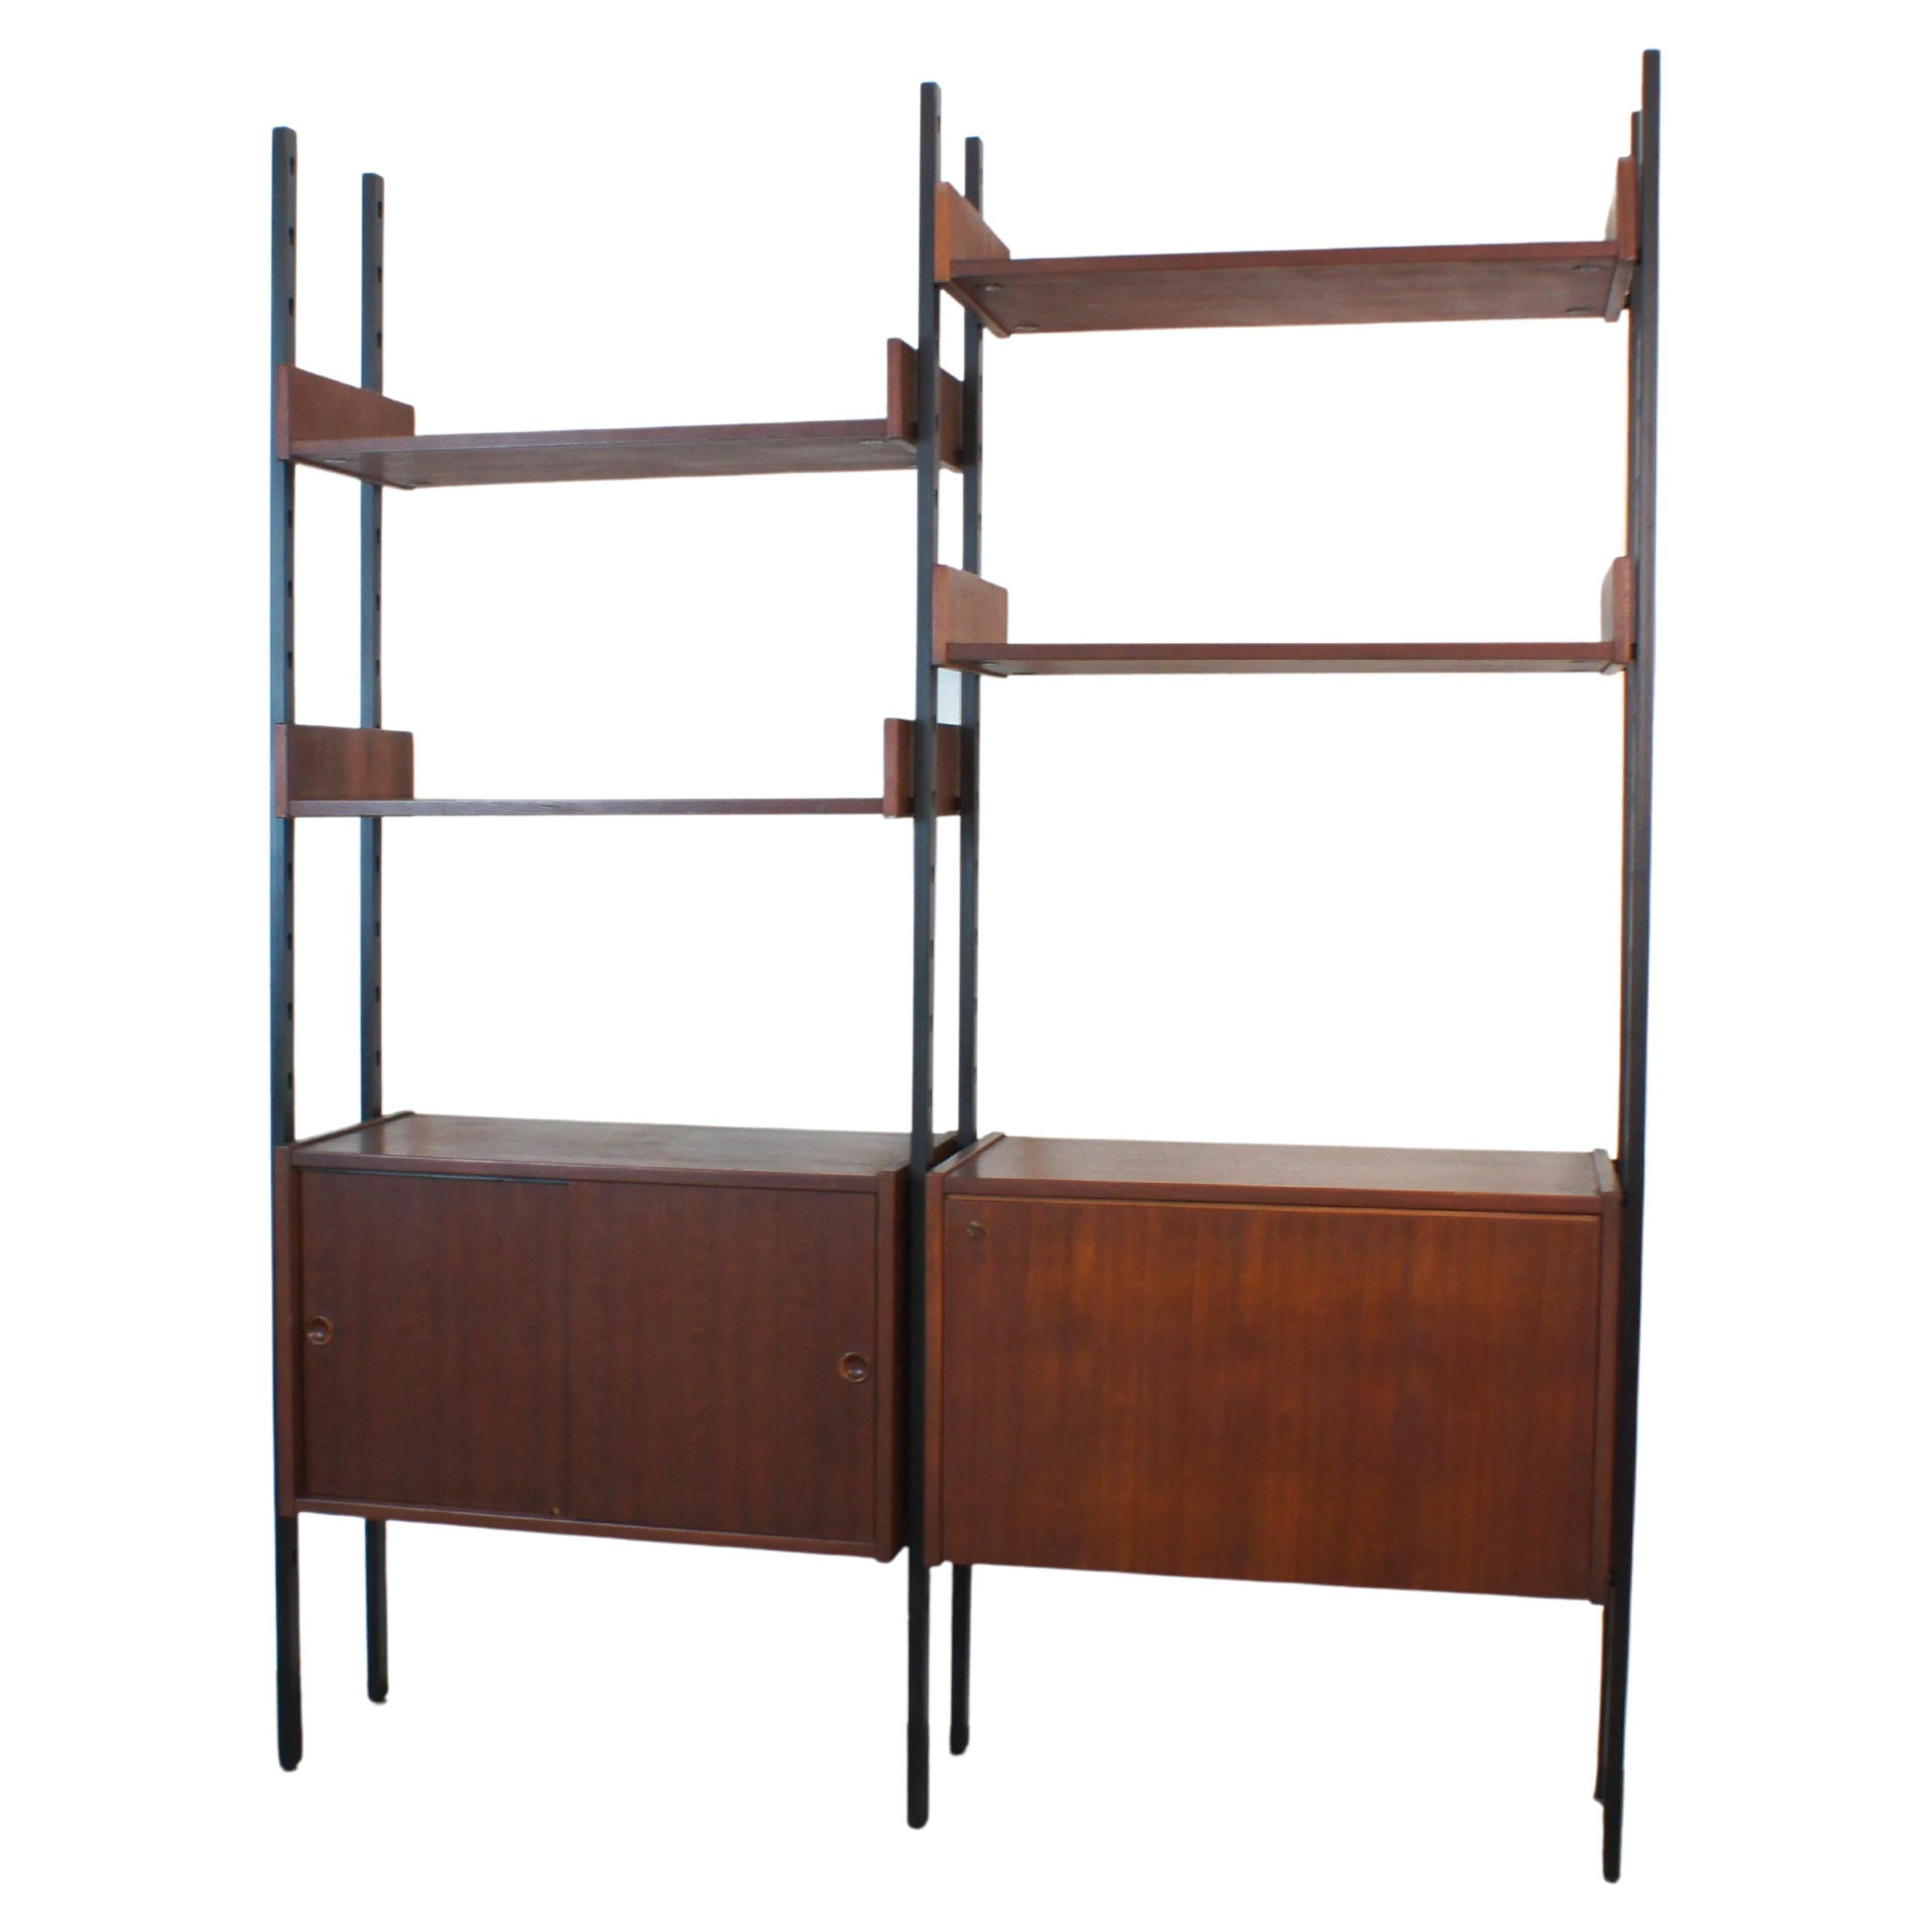 Free Standing Italian 60s Shelving System by Imb Serie Selex For Sale